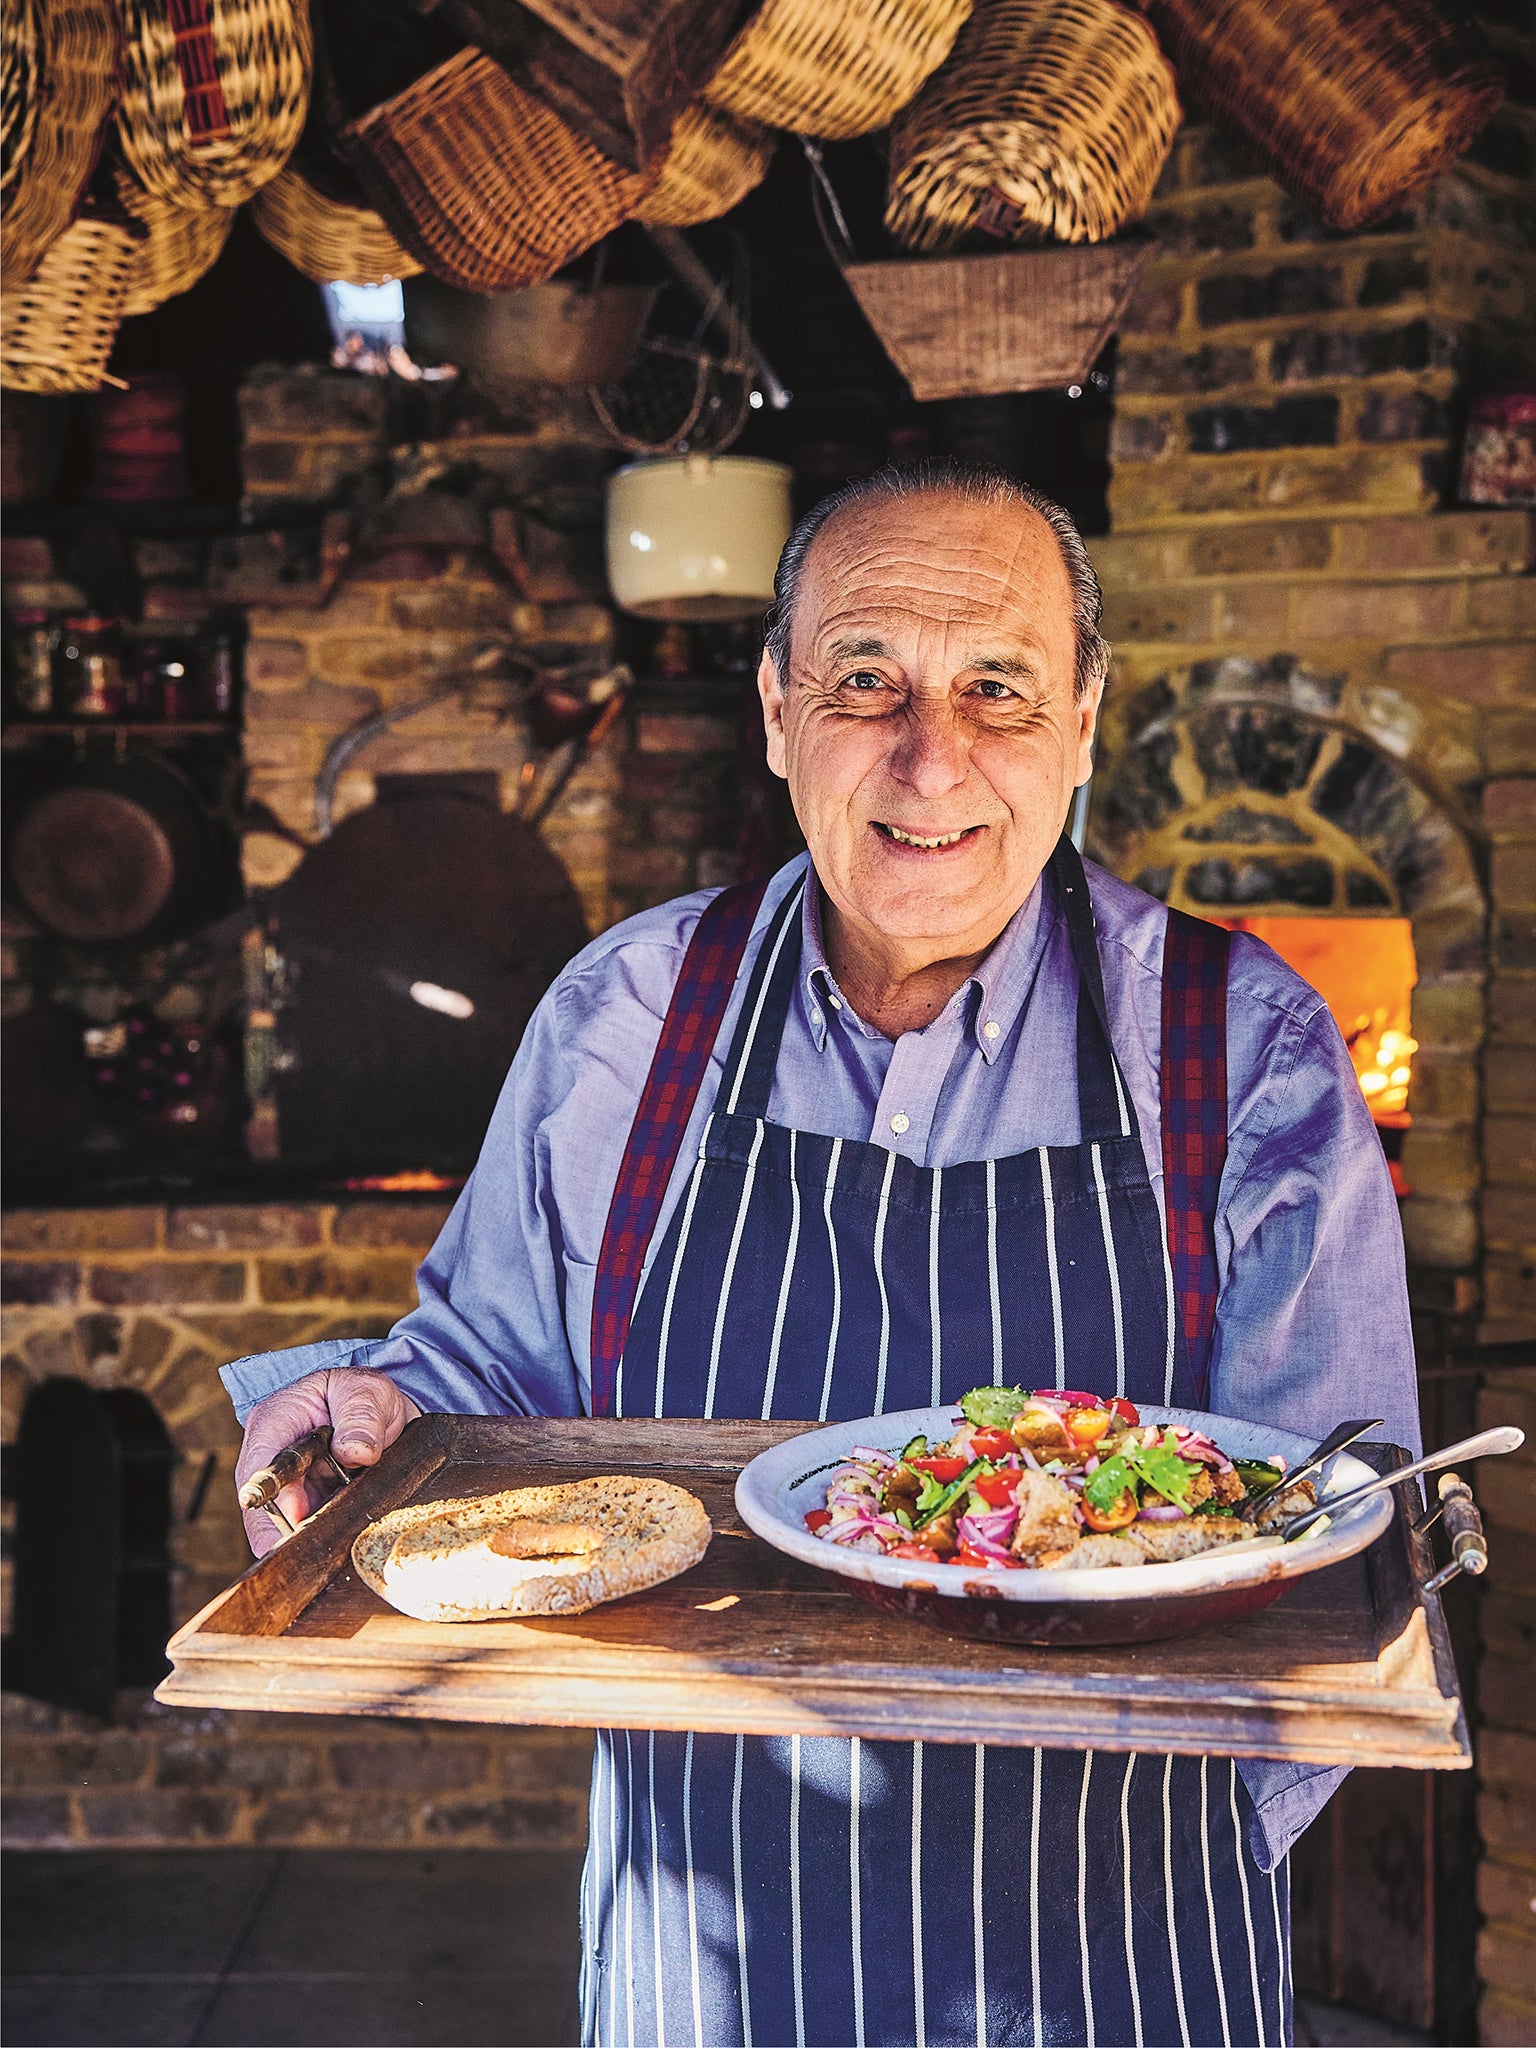 Contaldo now lives in a rustic house in... Walthamstow